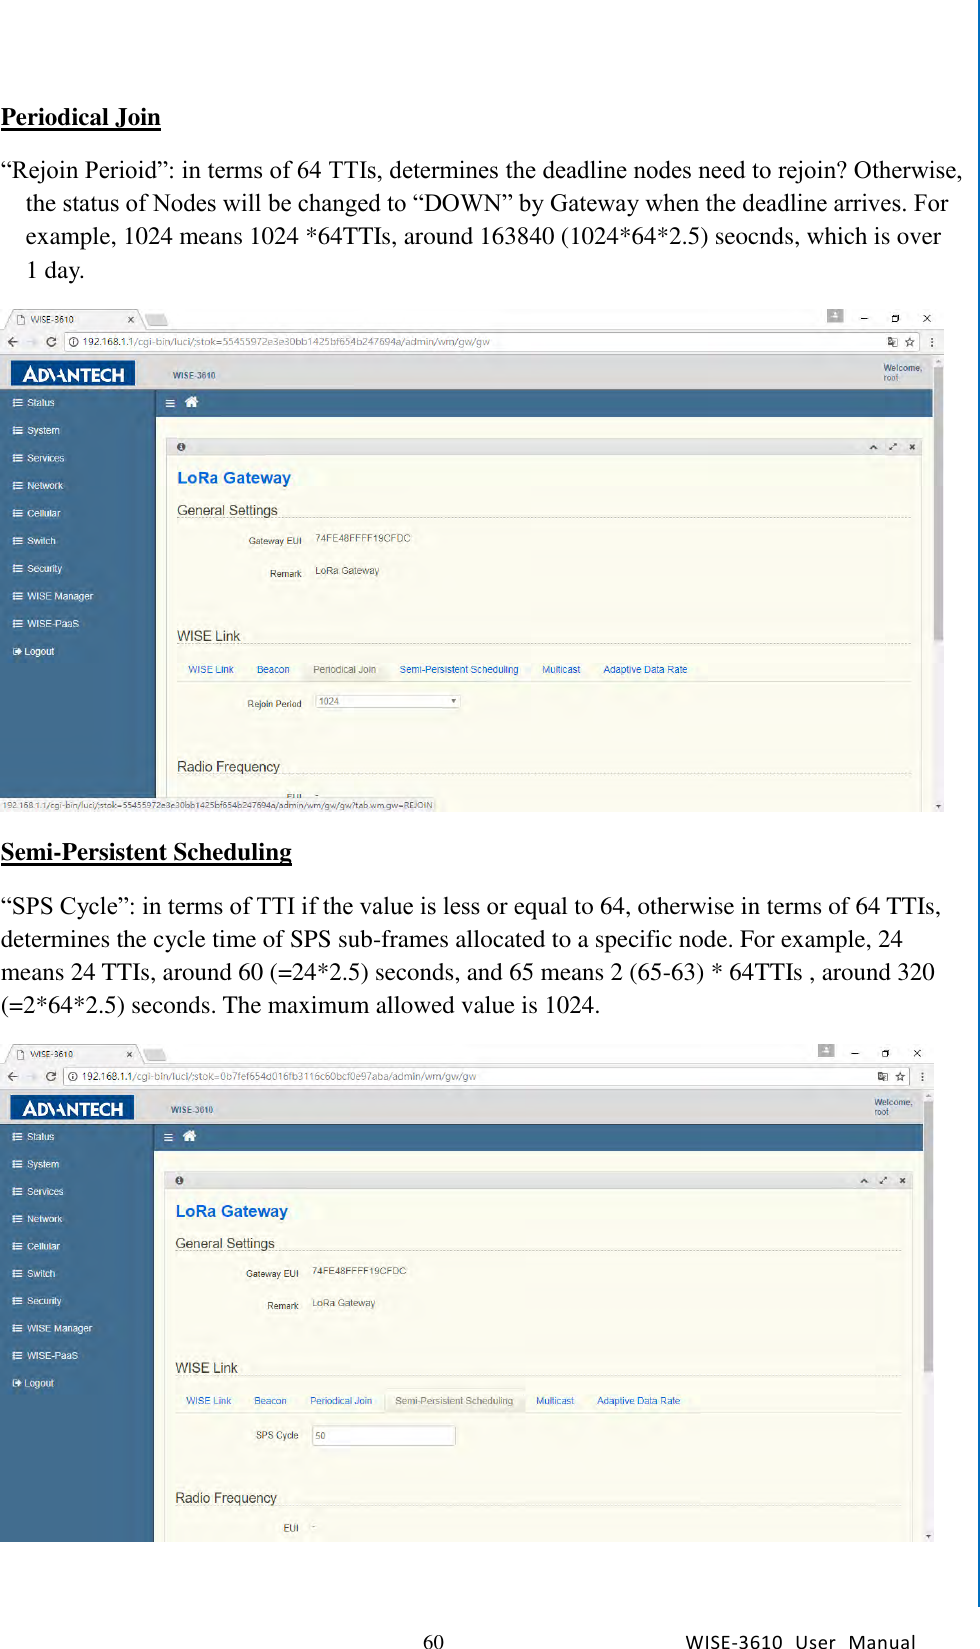   60 WISE-3610  User  Manual  Chapter5    Advantech Services Periodical Join “Rejoin Perioid”: in terms of 64 TTIs, determines the deadline nodes need to rejoin? Otherwise, the status of Nodes will be changed to “DOWN” by Gateway when the deadline arrives. For example, 1024 means 1024 *64TTIs, around 163840 (1024*64*2.5) seocnds, which is over 1 day.  Semi-Persistent Scheduling “SPS Cycle”: in terms of TTI if the value is less or equal to 64, otherwise in terms of 64 TTIs, determines the cycle time of SPS sub-frames allocated to a specific node. For example, 24 means 24 TTIs, around 60 (=24*2.5) seconds, and 65 means 2 (65-63) * 64TTIs , around 320 (=2*64*2.5) seconds. The maximum allowed value is 1024.   